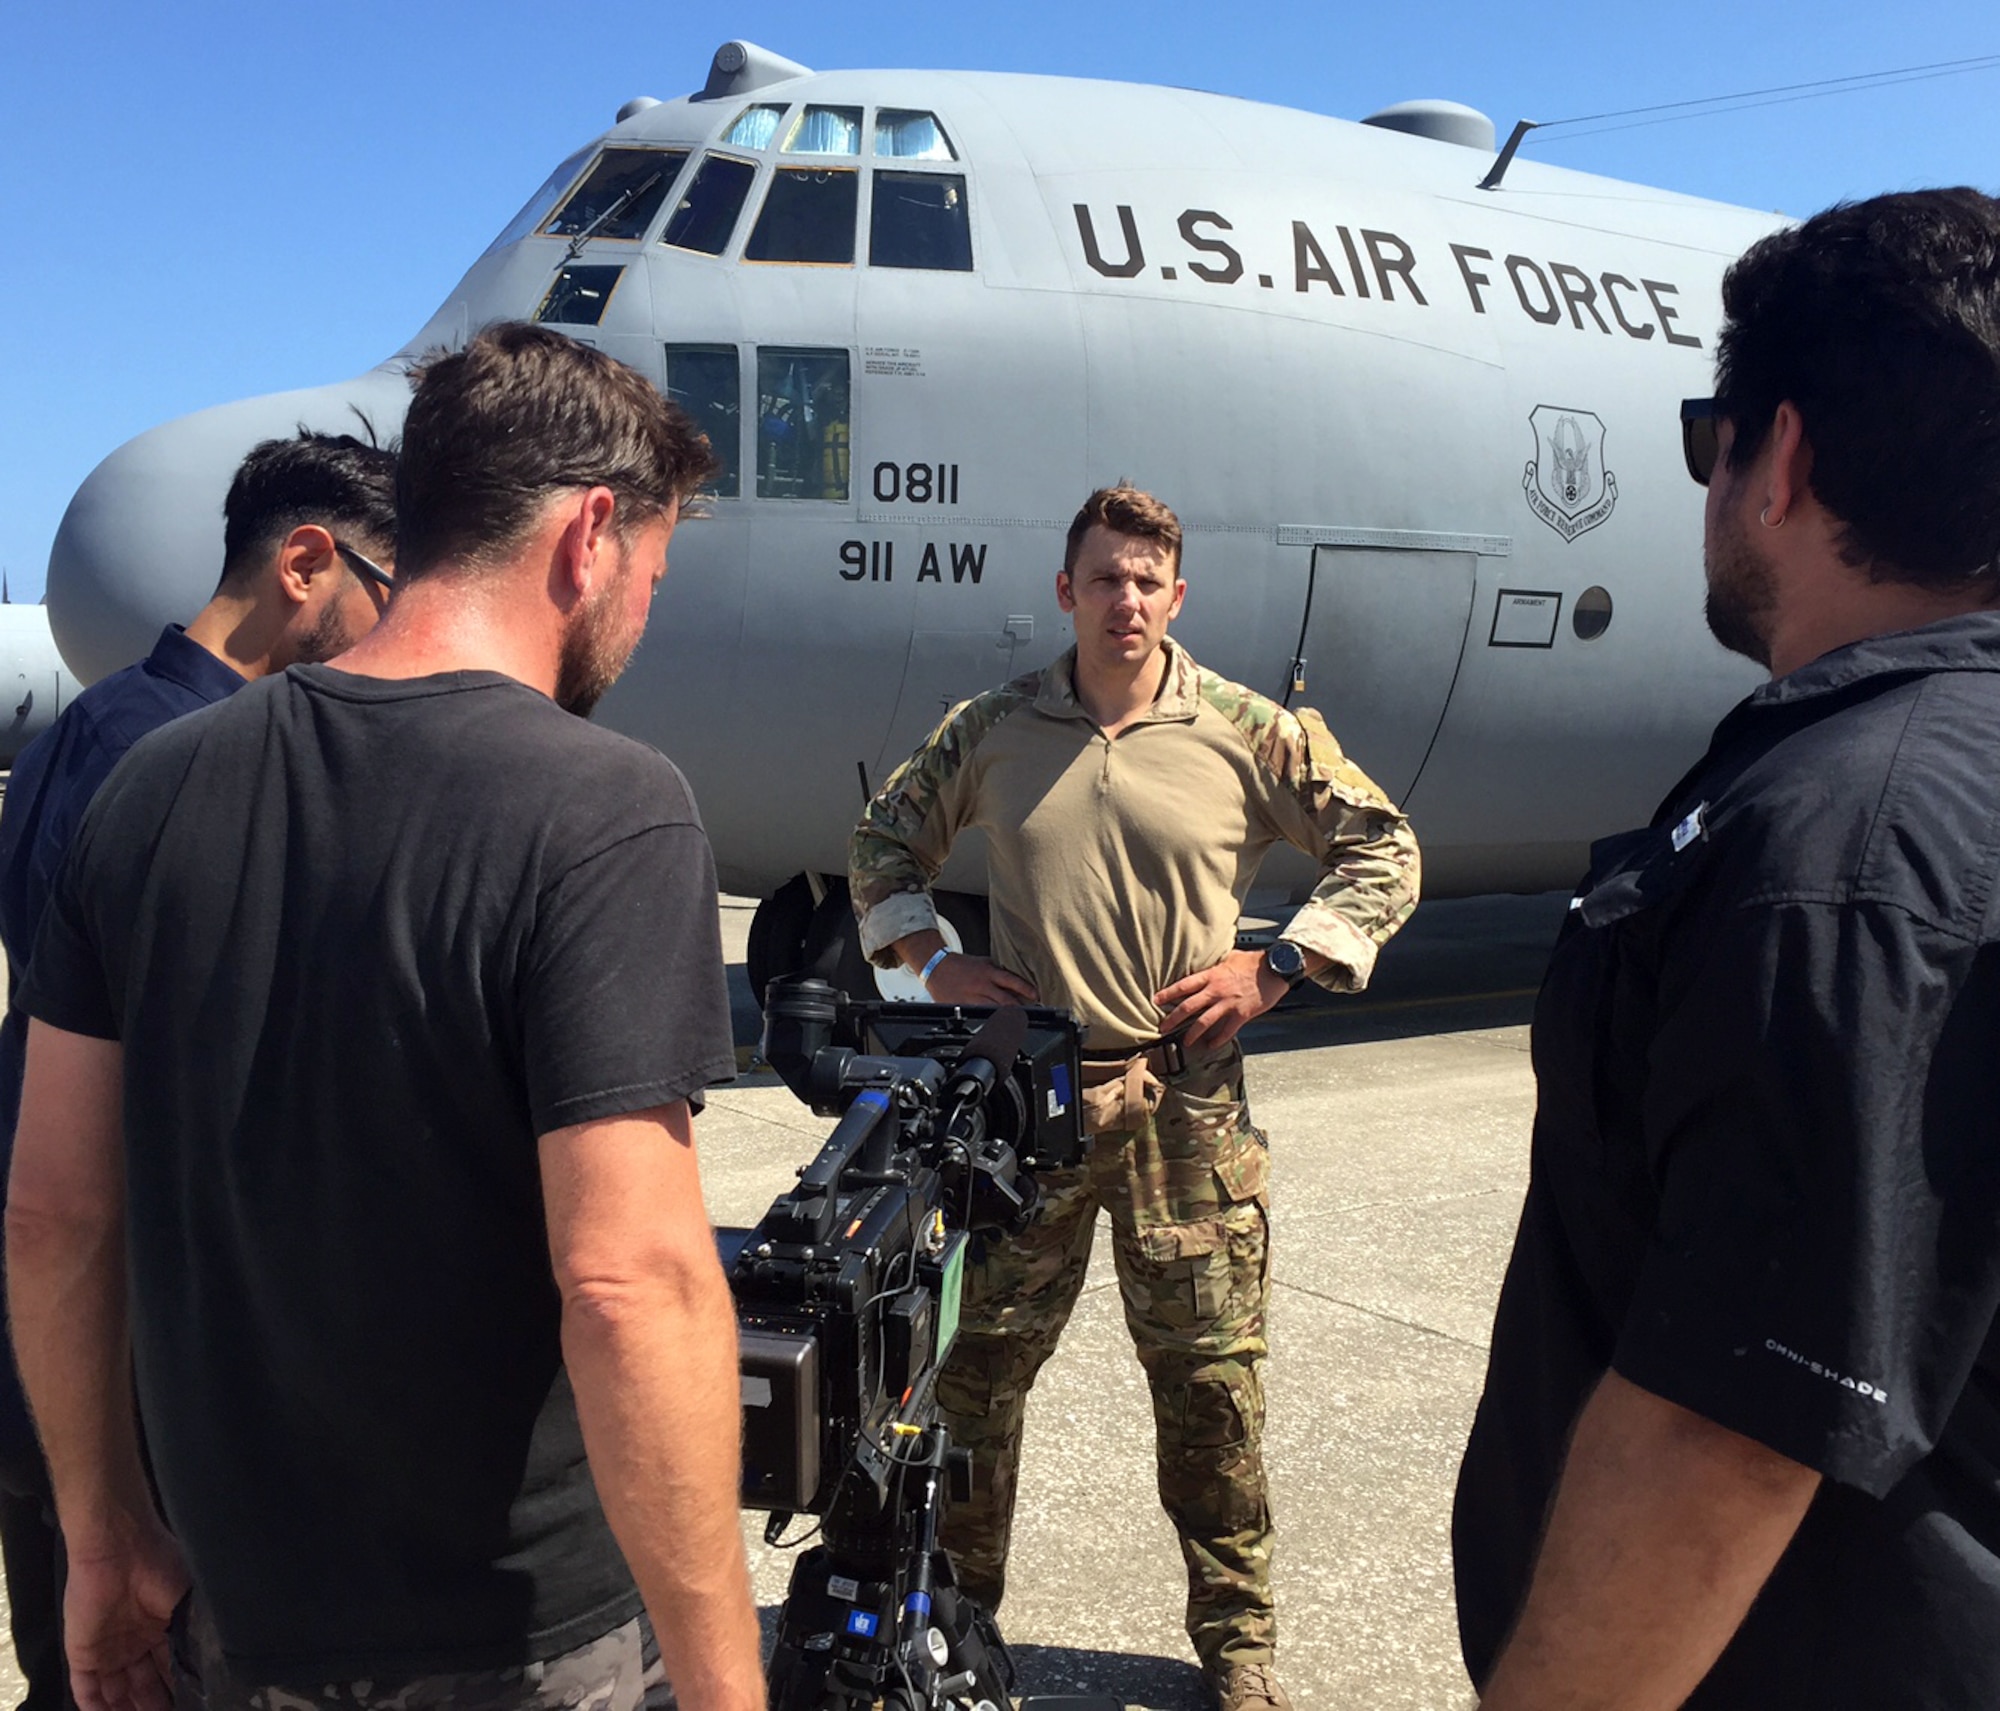 A Fox TV camera crew shoots footage of Tech. Sgt. Ben Domian, a survival, evasion, resistance, and escape specialist with the 920th Rescue Wing, in front of a HC-130 P/N King June 15, 2016 at Patrick Air Force Base, Fla. The network shot footage of Domian to use for its newest reality show, "Kicking and Screaming," which airs March. 9. Domian is one of 20 contestants on the show. (U.S. Air Force photo/Maj. Cathleen Snow)